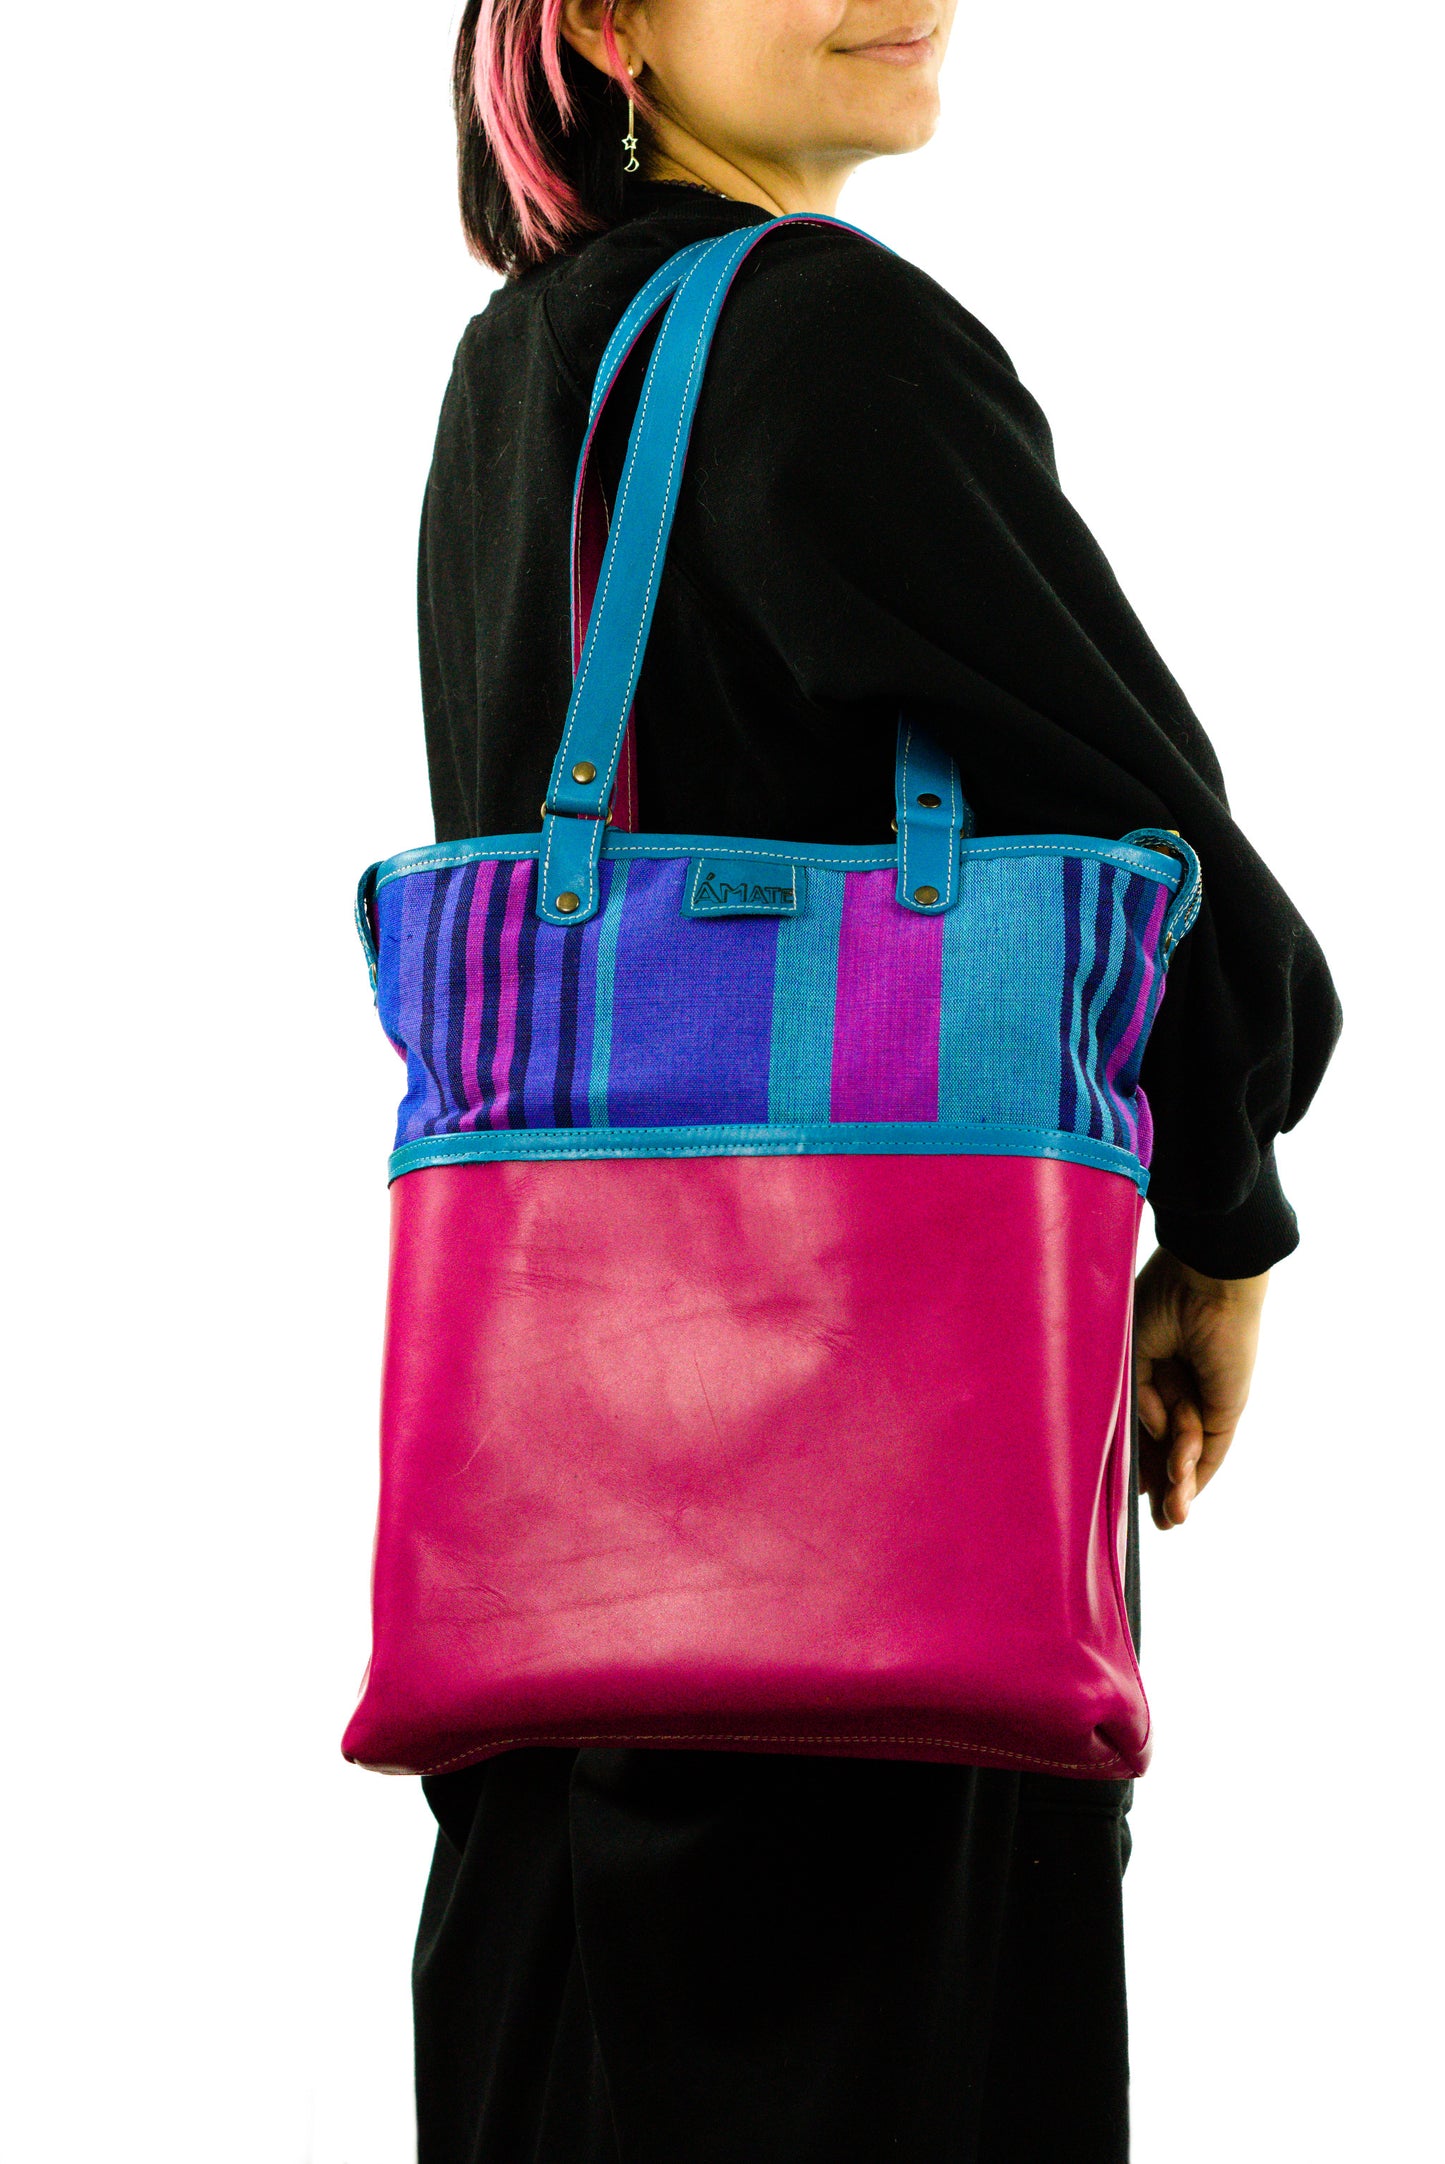 Tote Colors - Pink Yellow